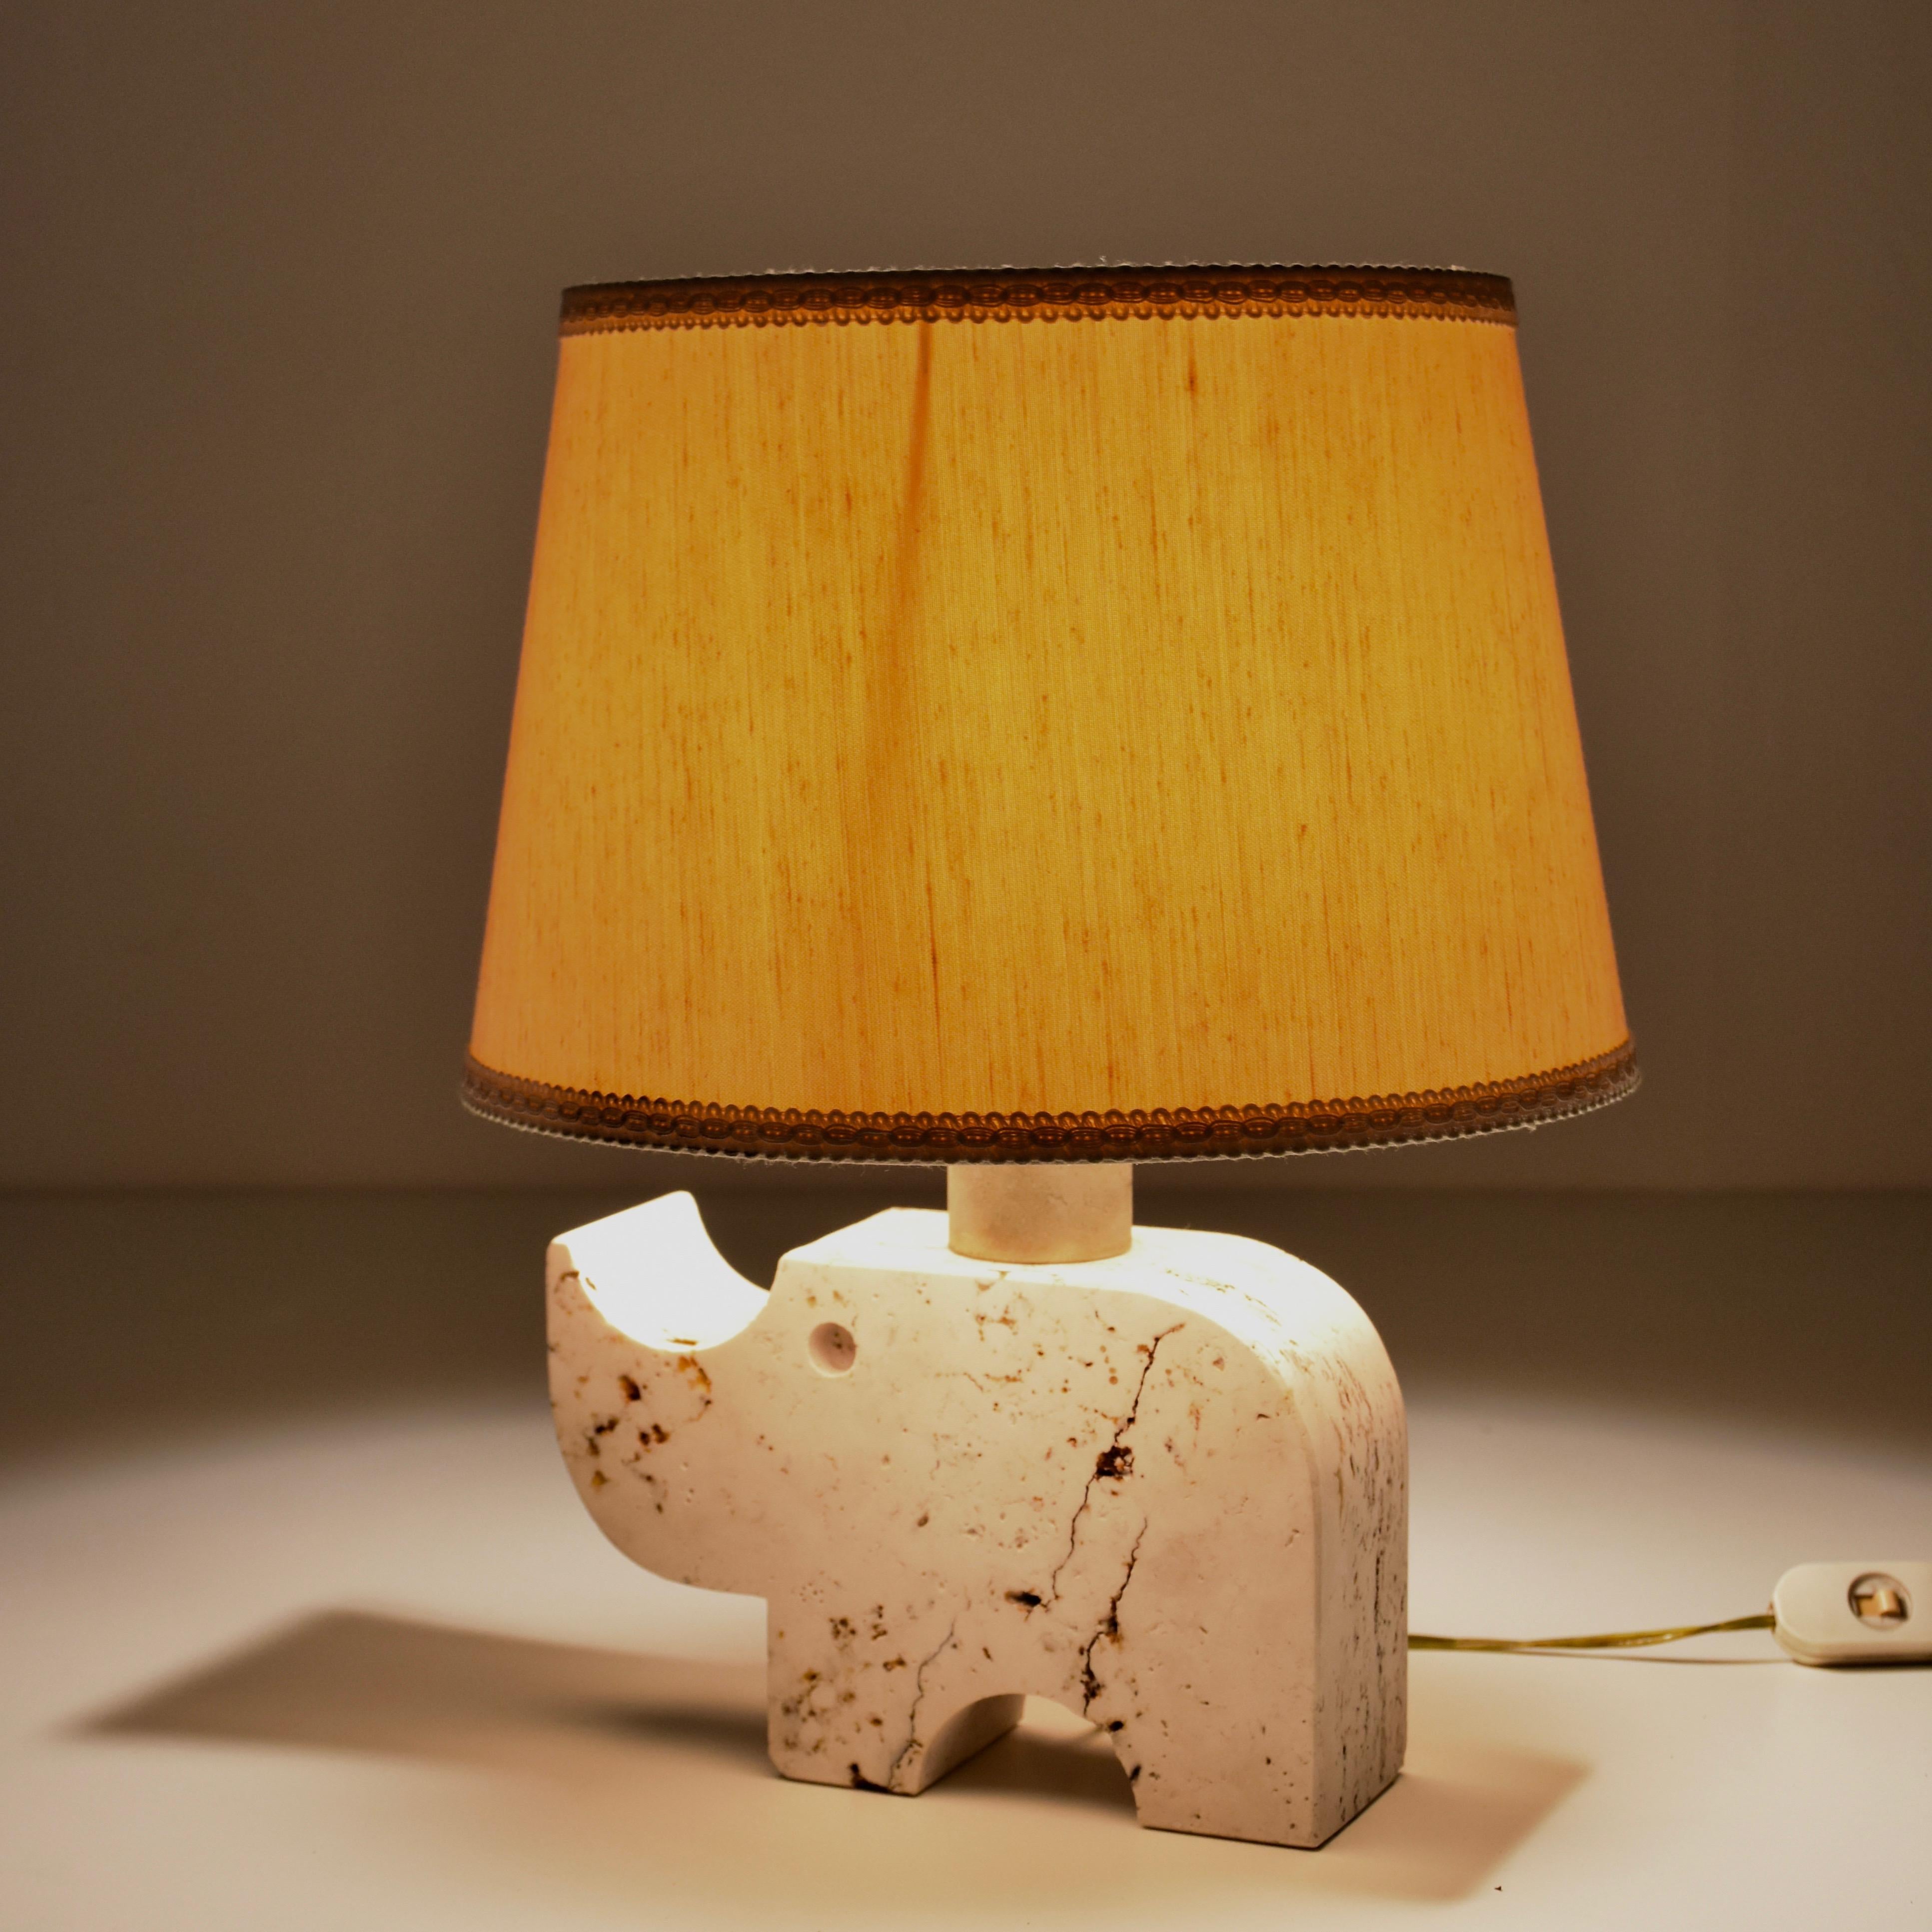 Late 20th Century Travertine Rhinoceros Table Lamp by Fratelli Manelli, Italy, 1970s, Marble Light